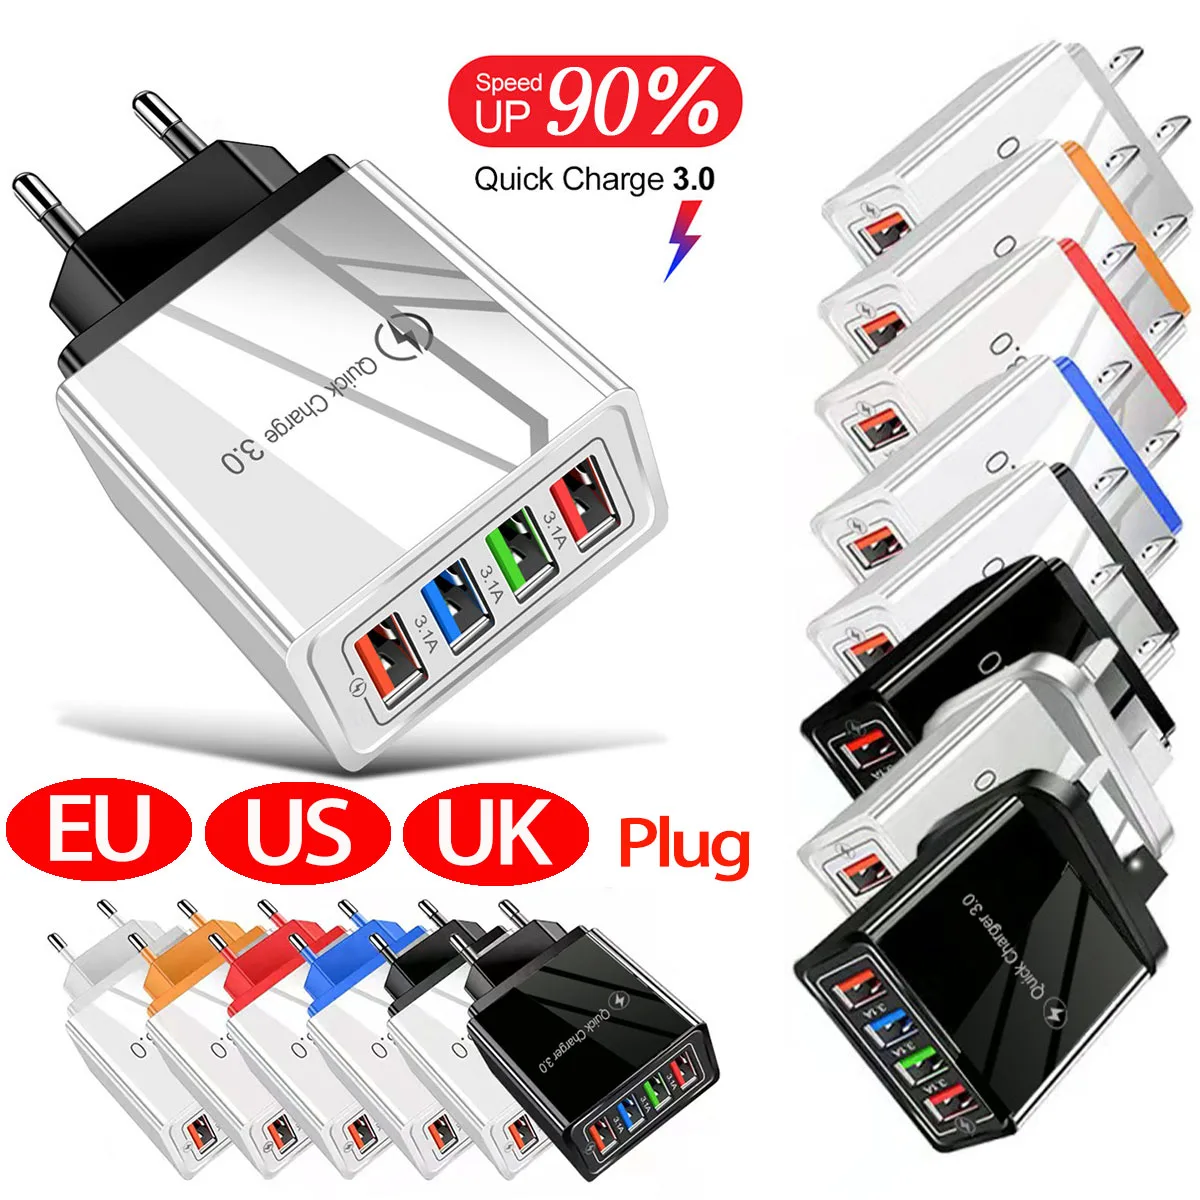 EU/US/UK Plug USB Charger Quick Charge 3.0 Phone Adapter Tablet Portable Wall Mobile 5V/2A Input Fast Charger for Huawei Iphone